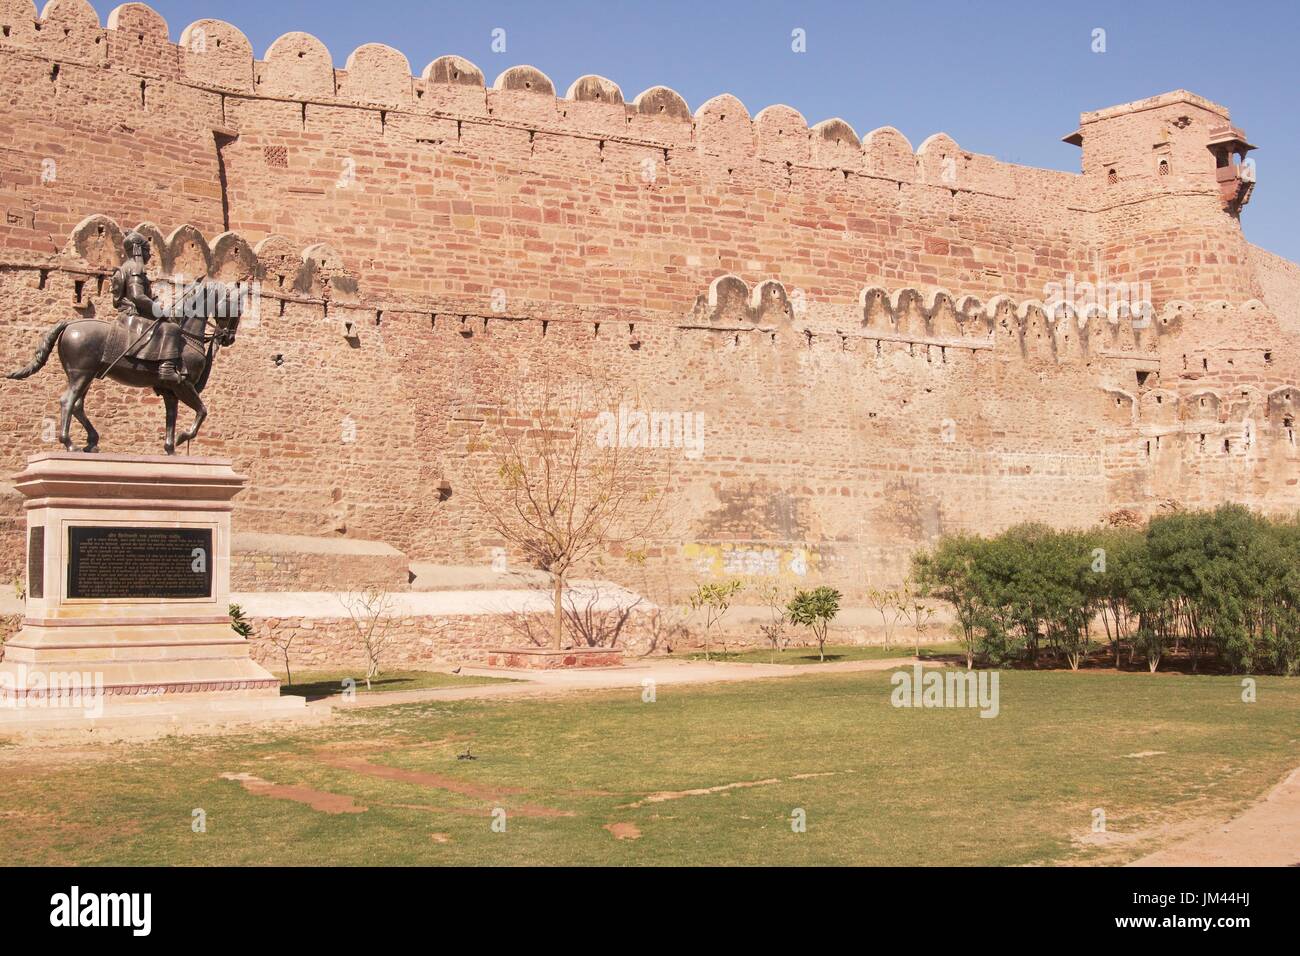 Ancient Indian fortress at Nagaur, Rajasthan, India. Large fortified perimeter wall. Statue in garden. Stock Photo